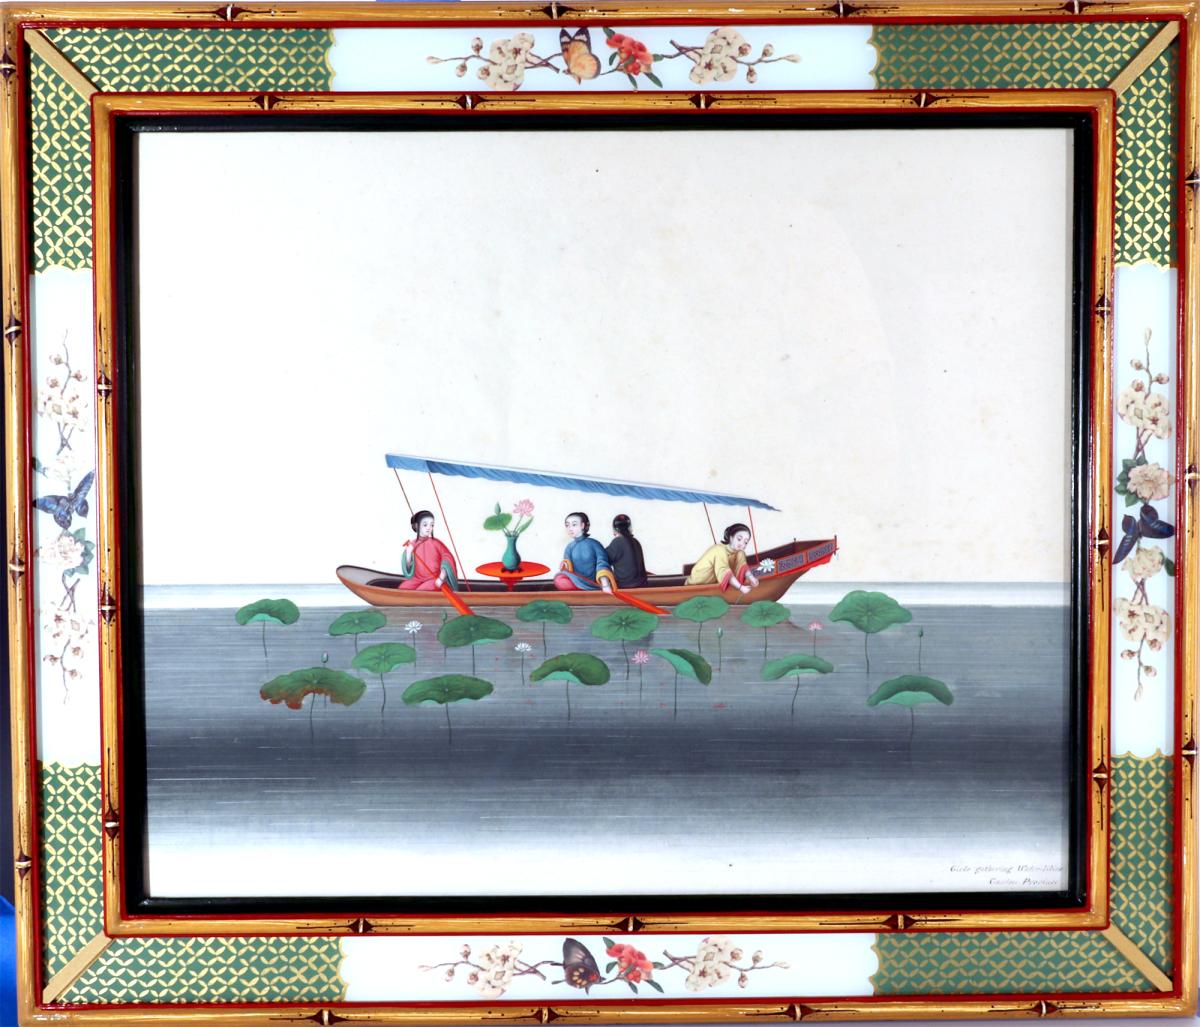 Chinese Large Watercolours on Paper of Junks and Sampans, After drawings done by William Alexander (1767-1816) for Sir John Barrow, Circa 1805-10